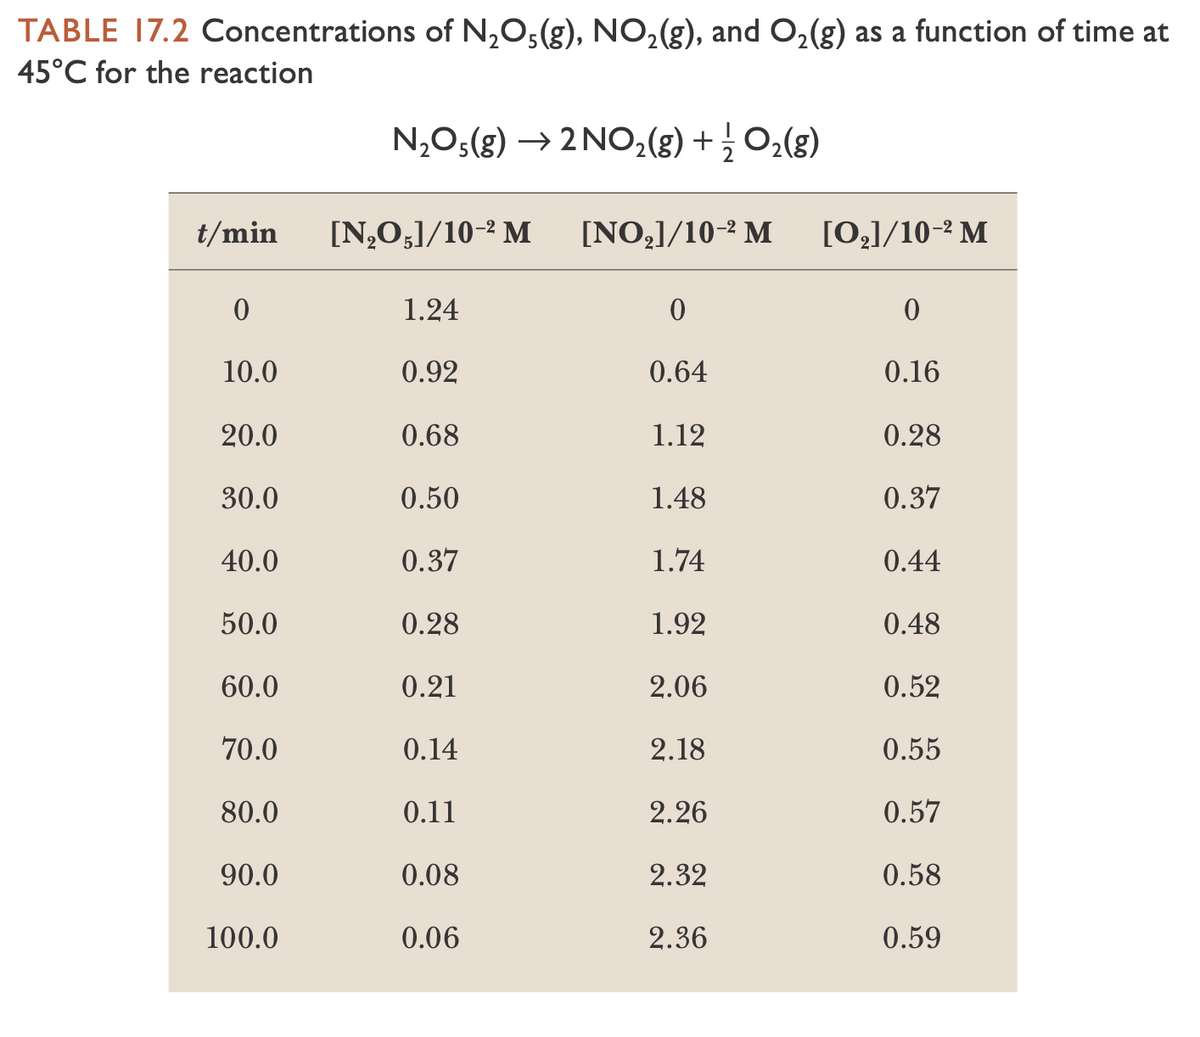 TABLE 17.2 Concentrations of N,0s(g), NO,(g), and O2(g) as a function of time at
45°C for the reaction
N,O5(g) → 2 NO,(g) +;O2(g)
t/min
[N,O;]/10-2 M
[NO,]/10-2 M
[02]/10-2 M
1.24
10.0
0.92
0.64
0.16
20.0
0.68
1.12
0.28
30.0
0.50
1.48
0.37
40.0
0.37
1.74
0.44
50.0
0.28
1.92
0.48
60.0
0.21
2.06
0.52
70.0
0.14
2.18
0.55
80.0
0.11
2.26
0.57
90.0
0.08
2.32
0.58
100.0
0.06
2.36
0.59
